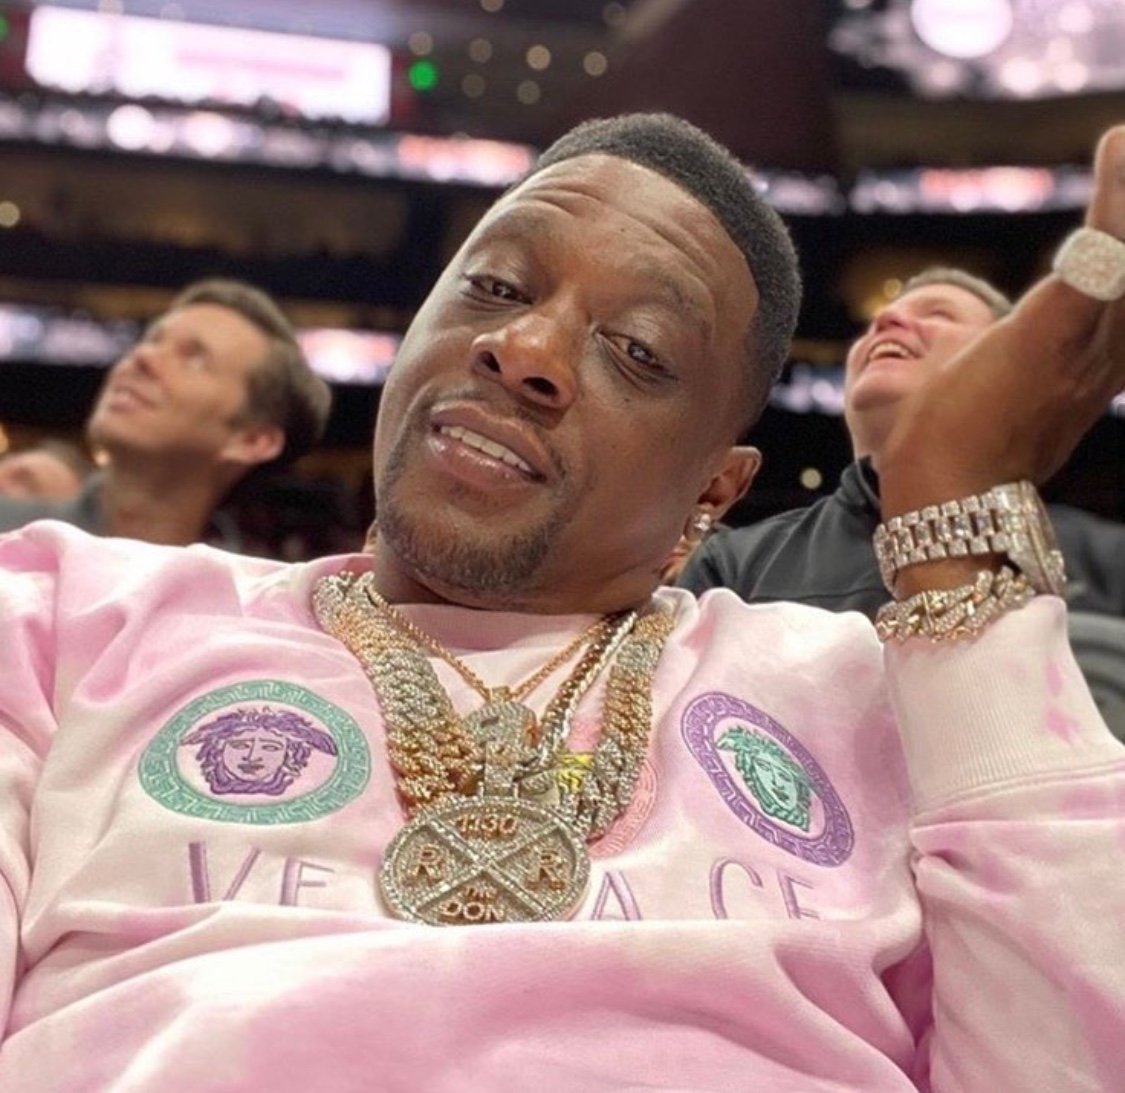 Boosie Badazz allegedly kicked a woman out of the club after she commented on his breath